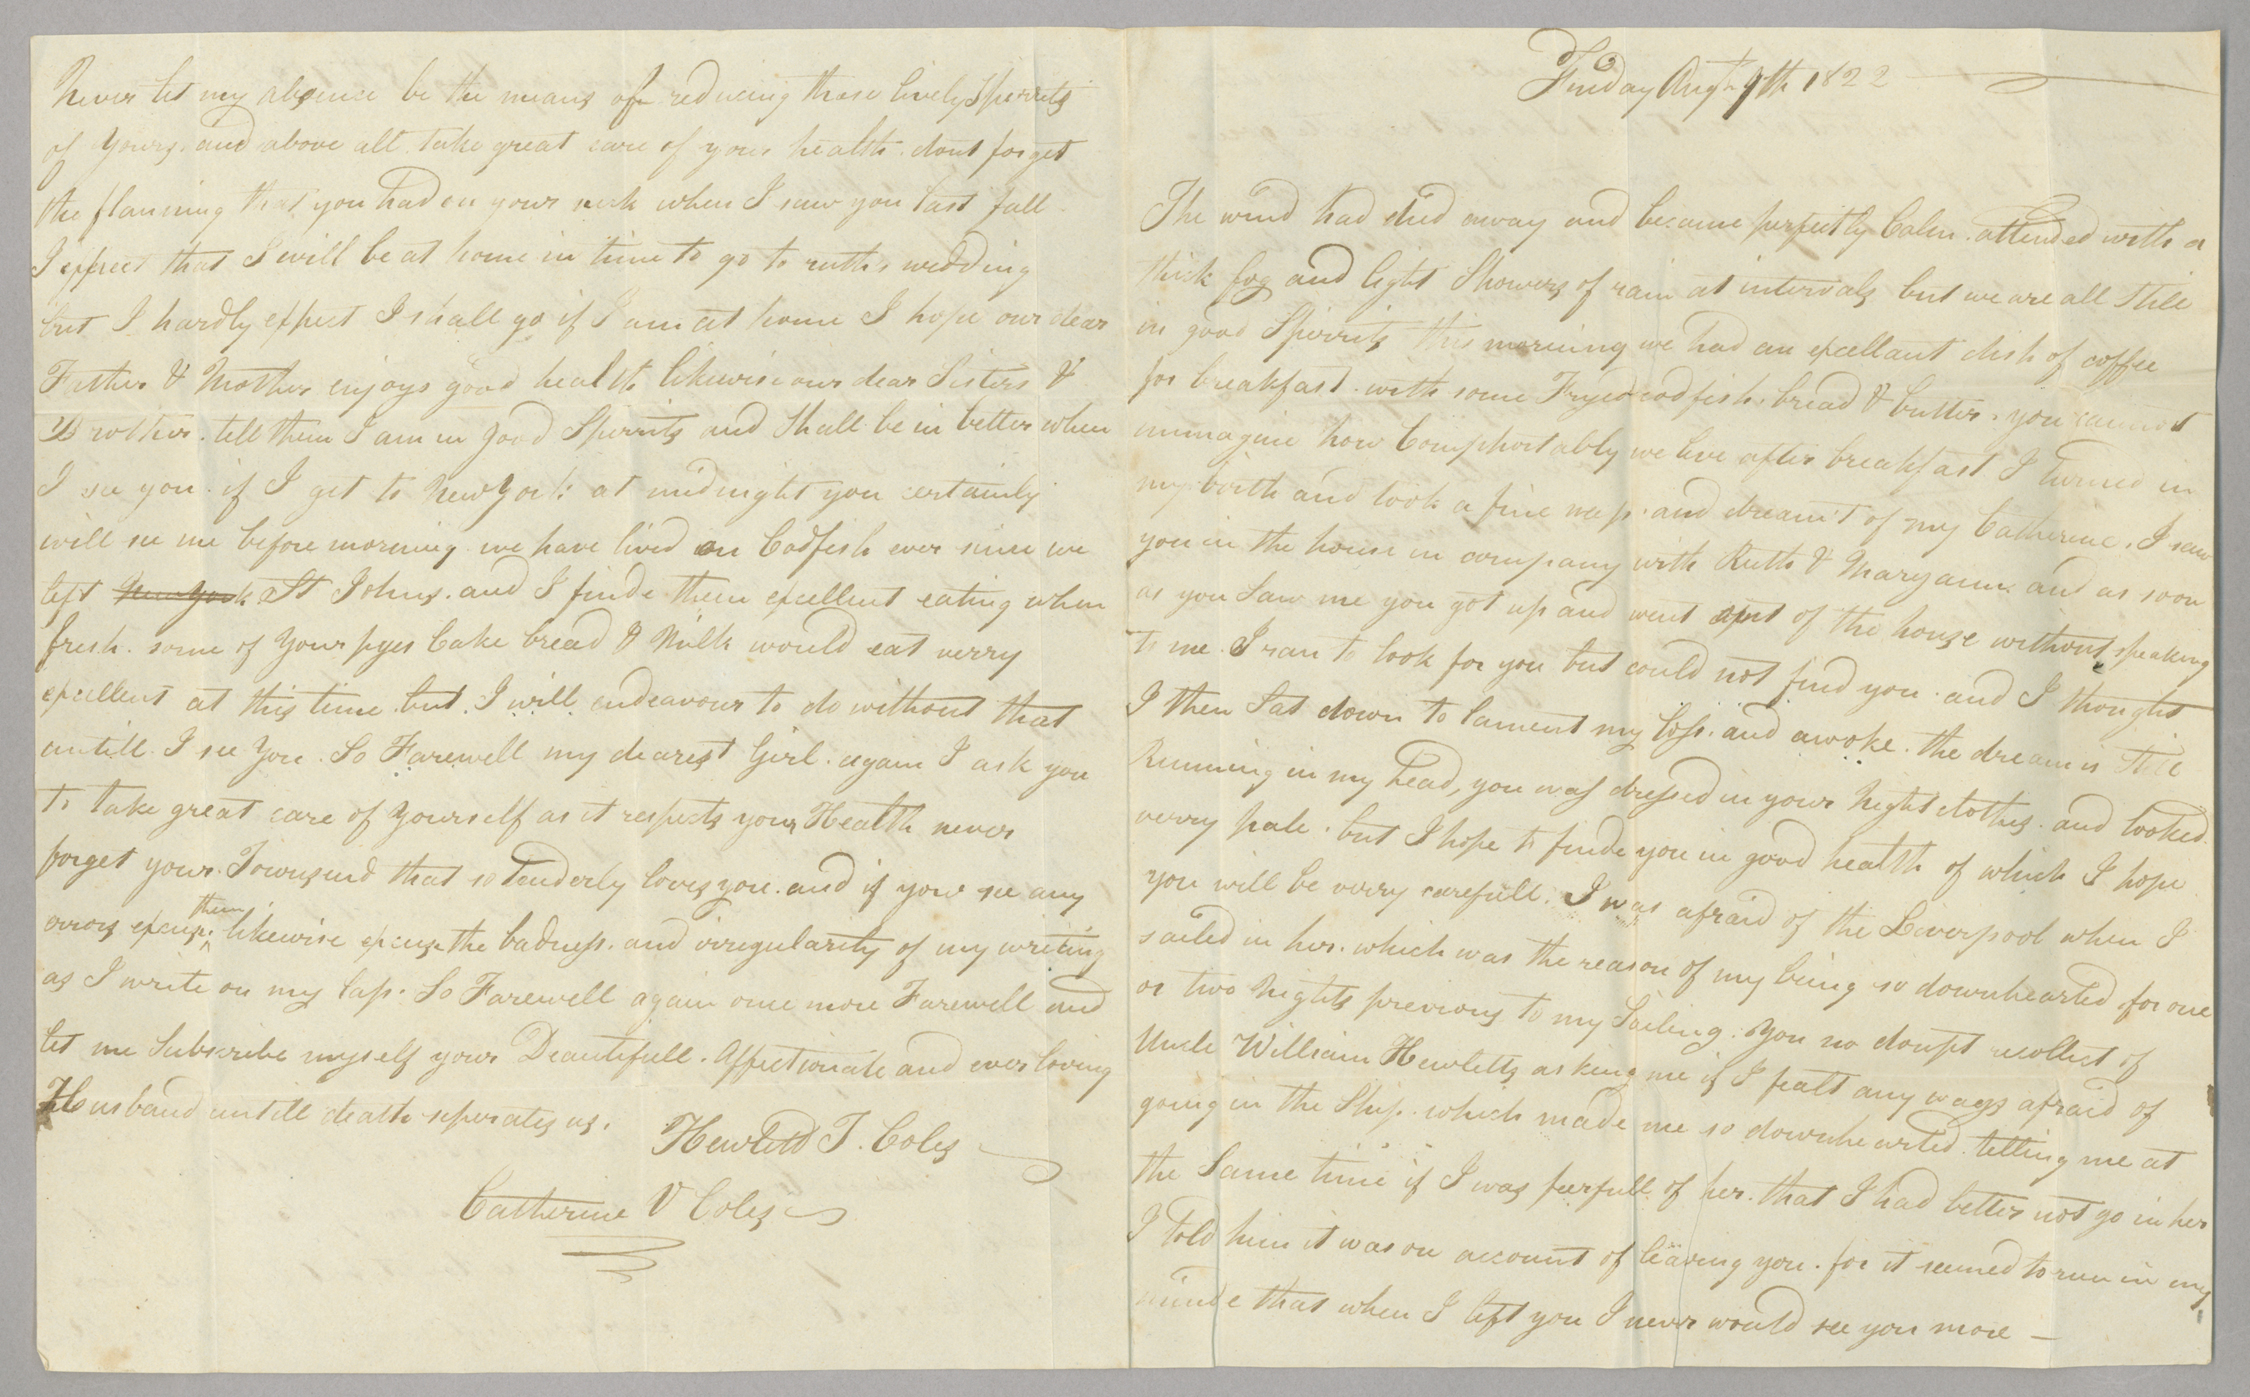 Letter, Hewlett T[ownsend] Coles, at sea, to "My Dear Wife," [Catherine Van Suydam Coles], n.p., Pages 2-3